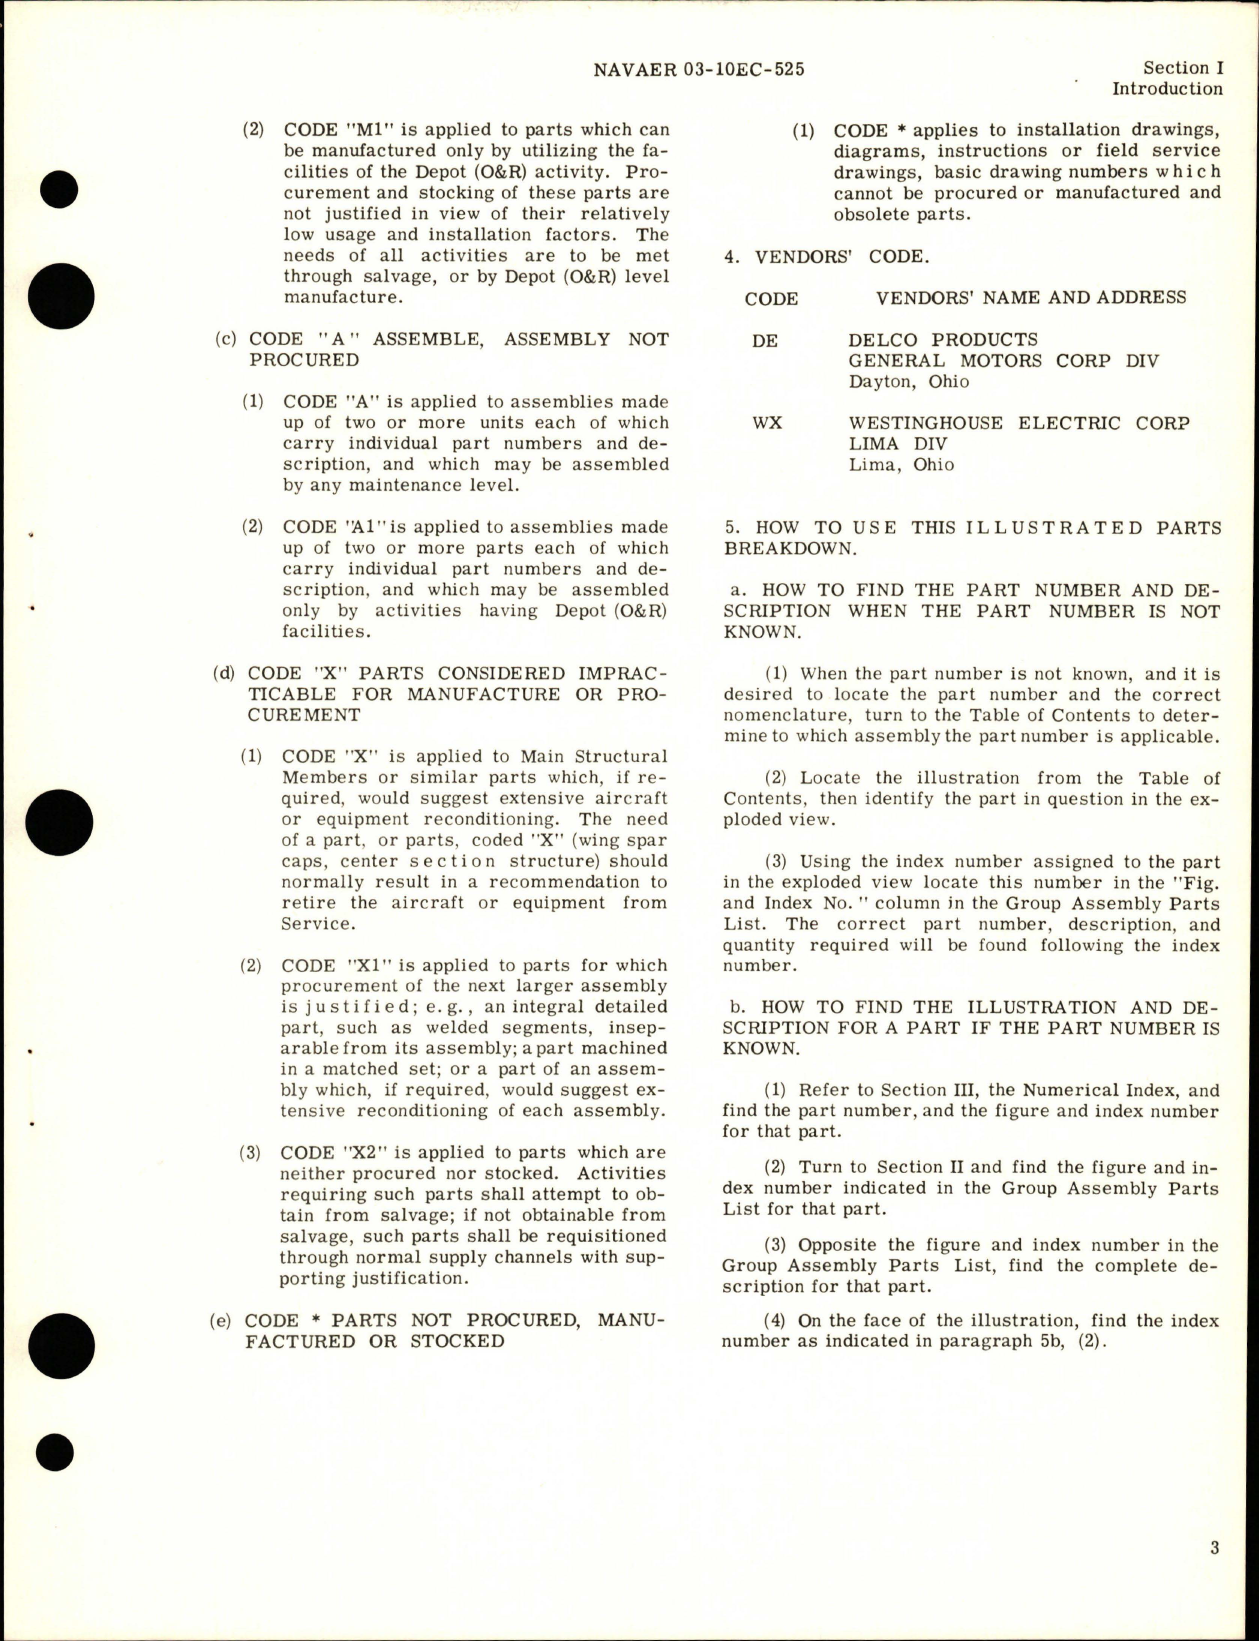 Sample page 5 from AirCorps Library document: Illustrated Parts Breakdown for Fuel Pumps